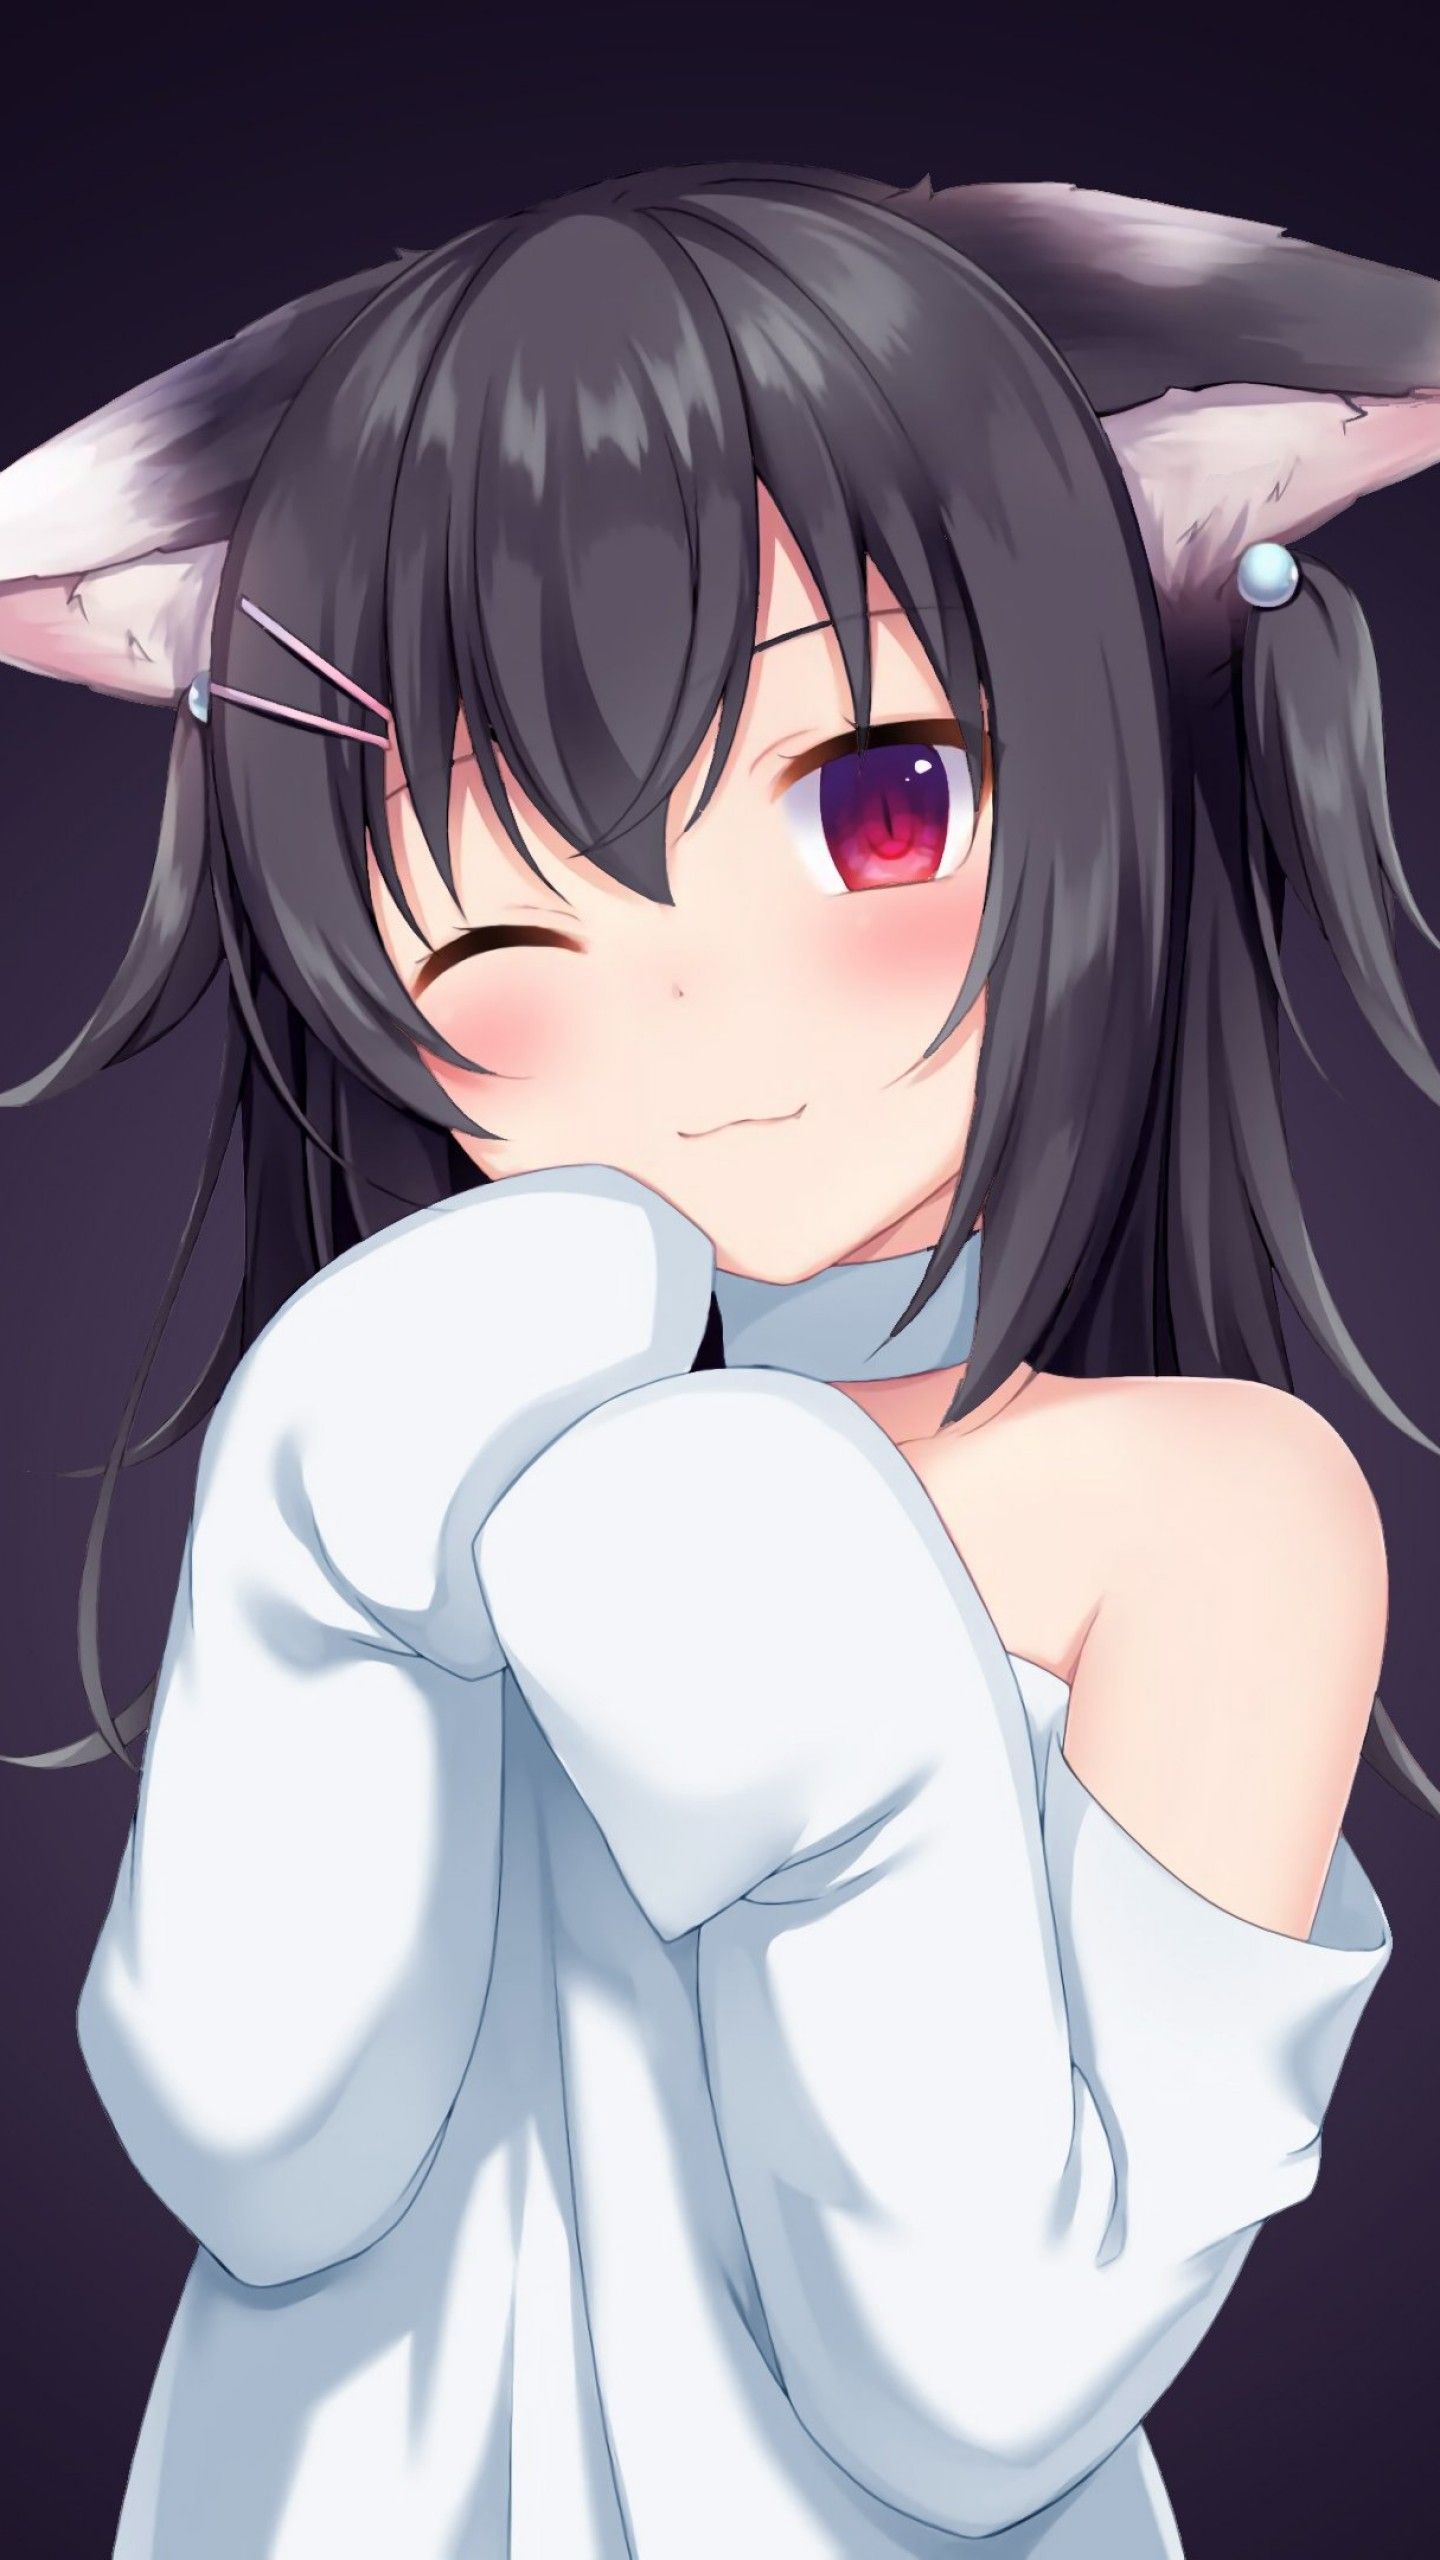 Anime Cat Girls With Black Hair And Blue Eyes - anime girl